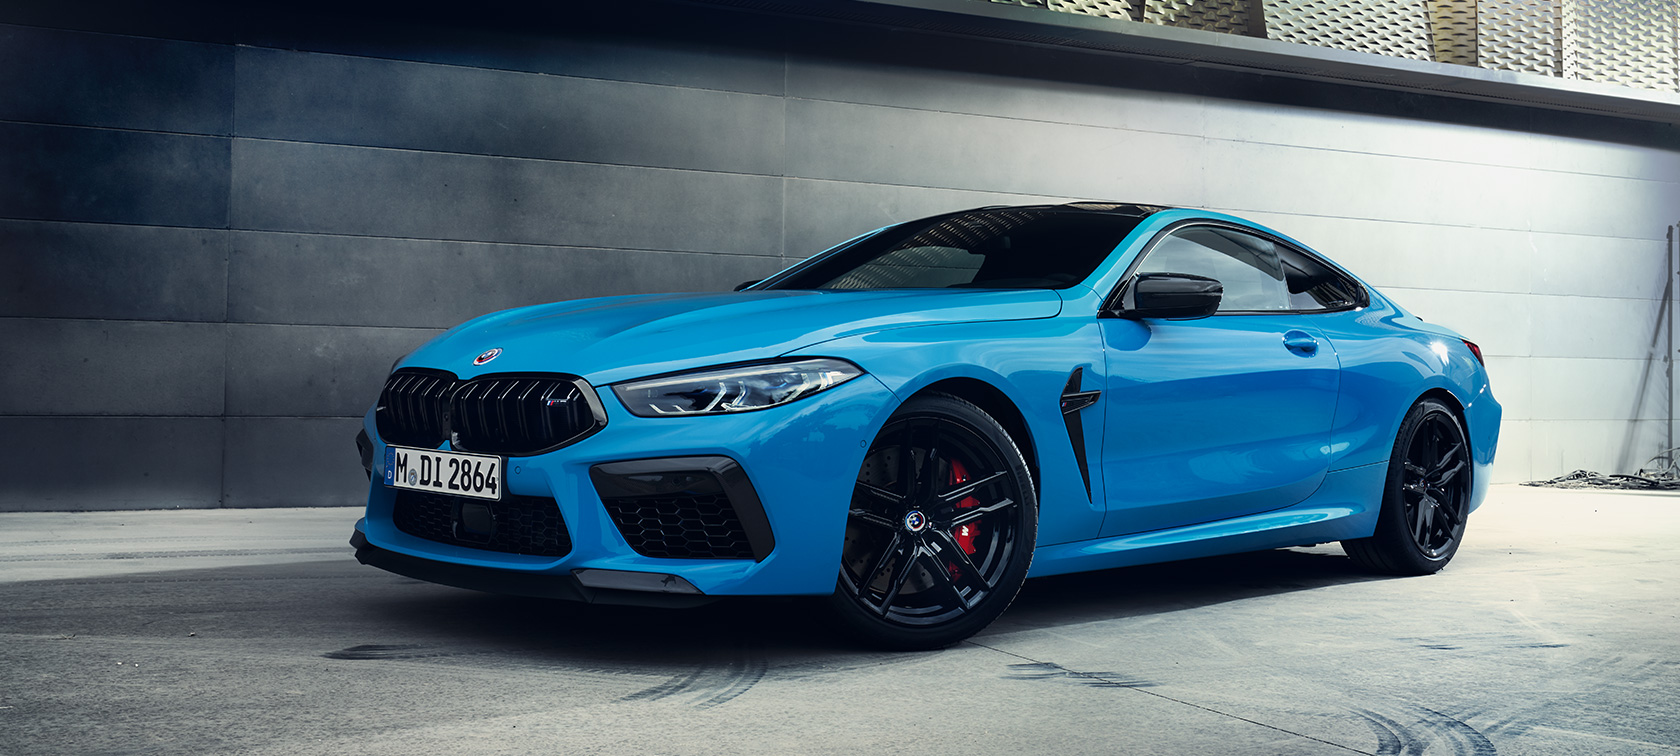 BMW M8 Competition Coupé F92 LCI Facelift 2022 Daytona Beach Blue uni three-quarter side view standing in front of a wall